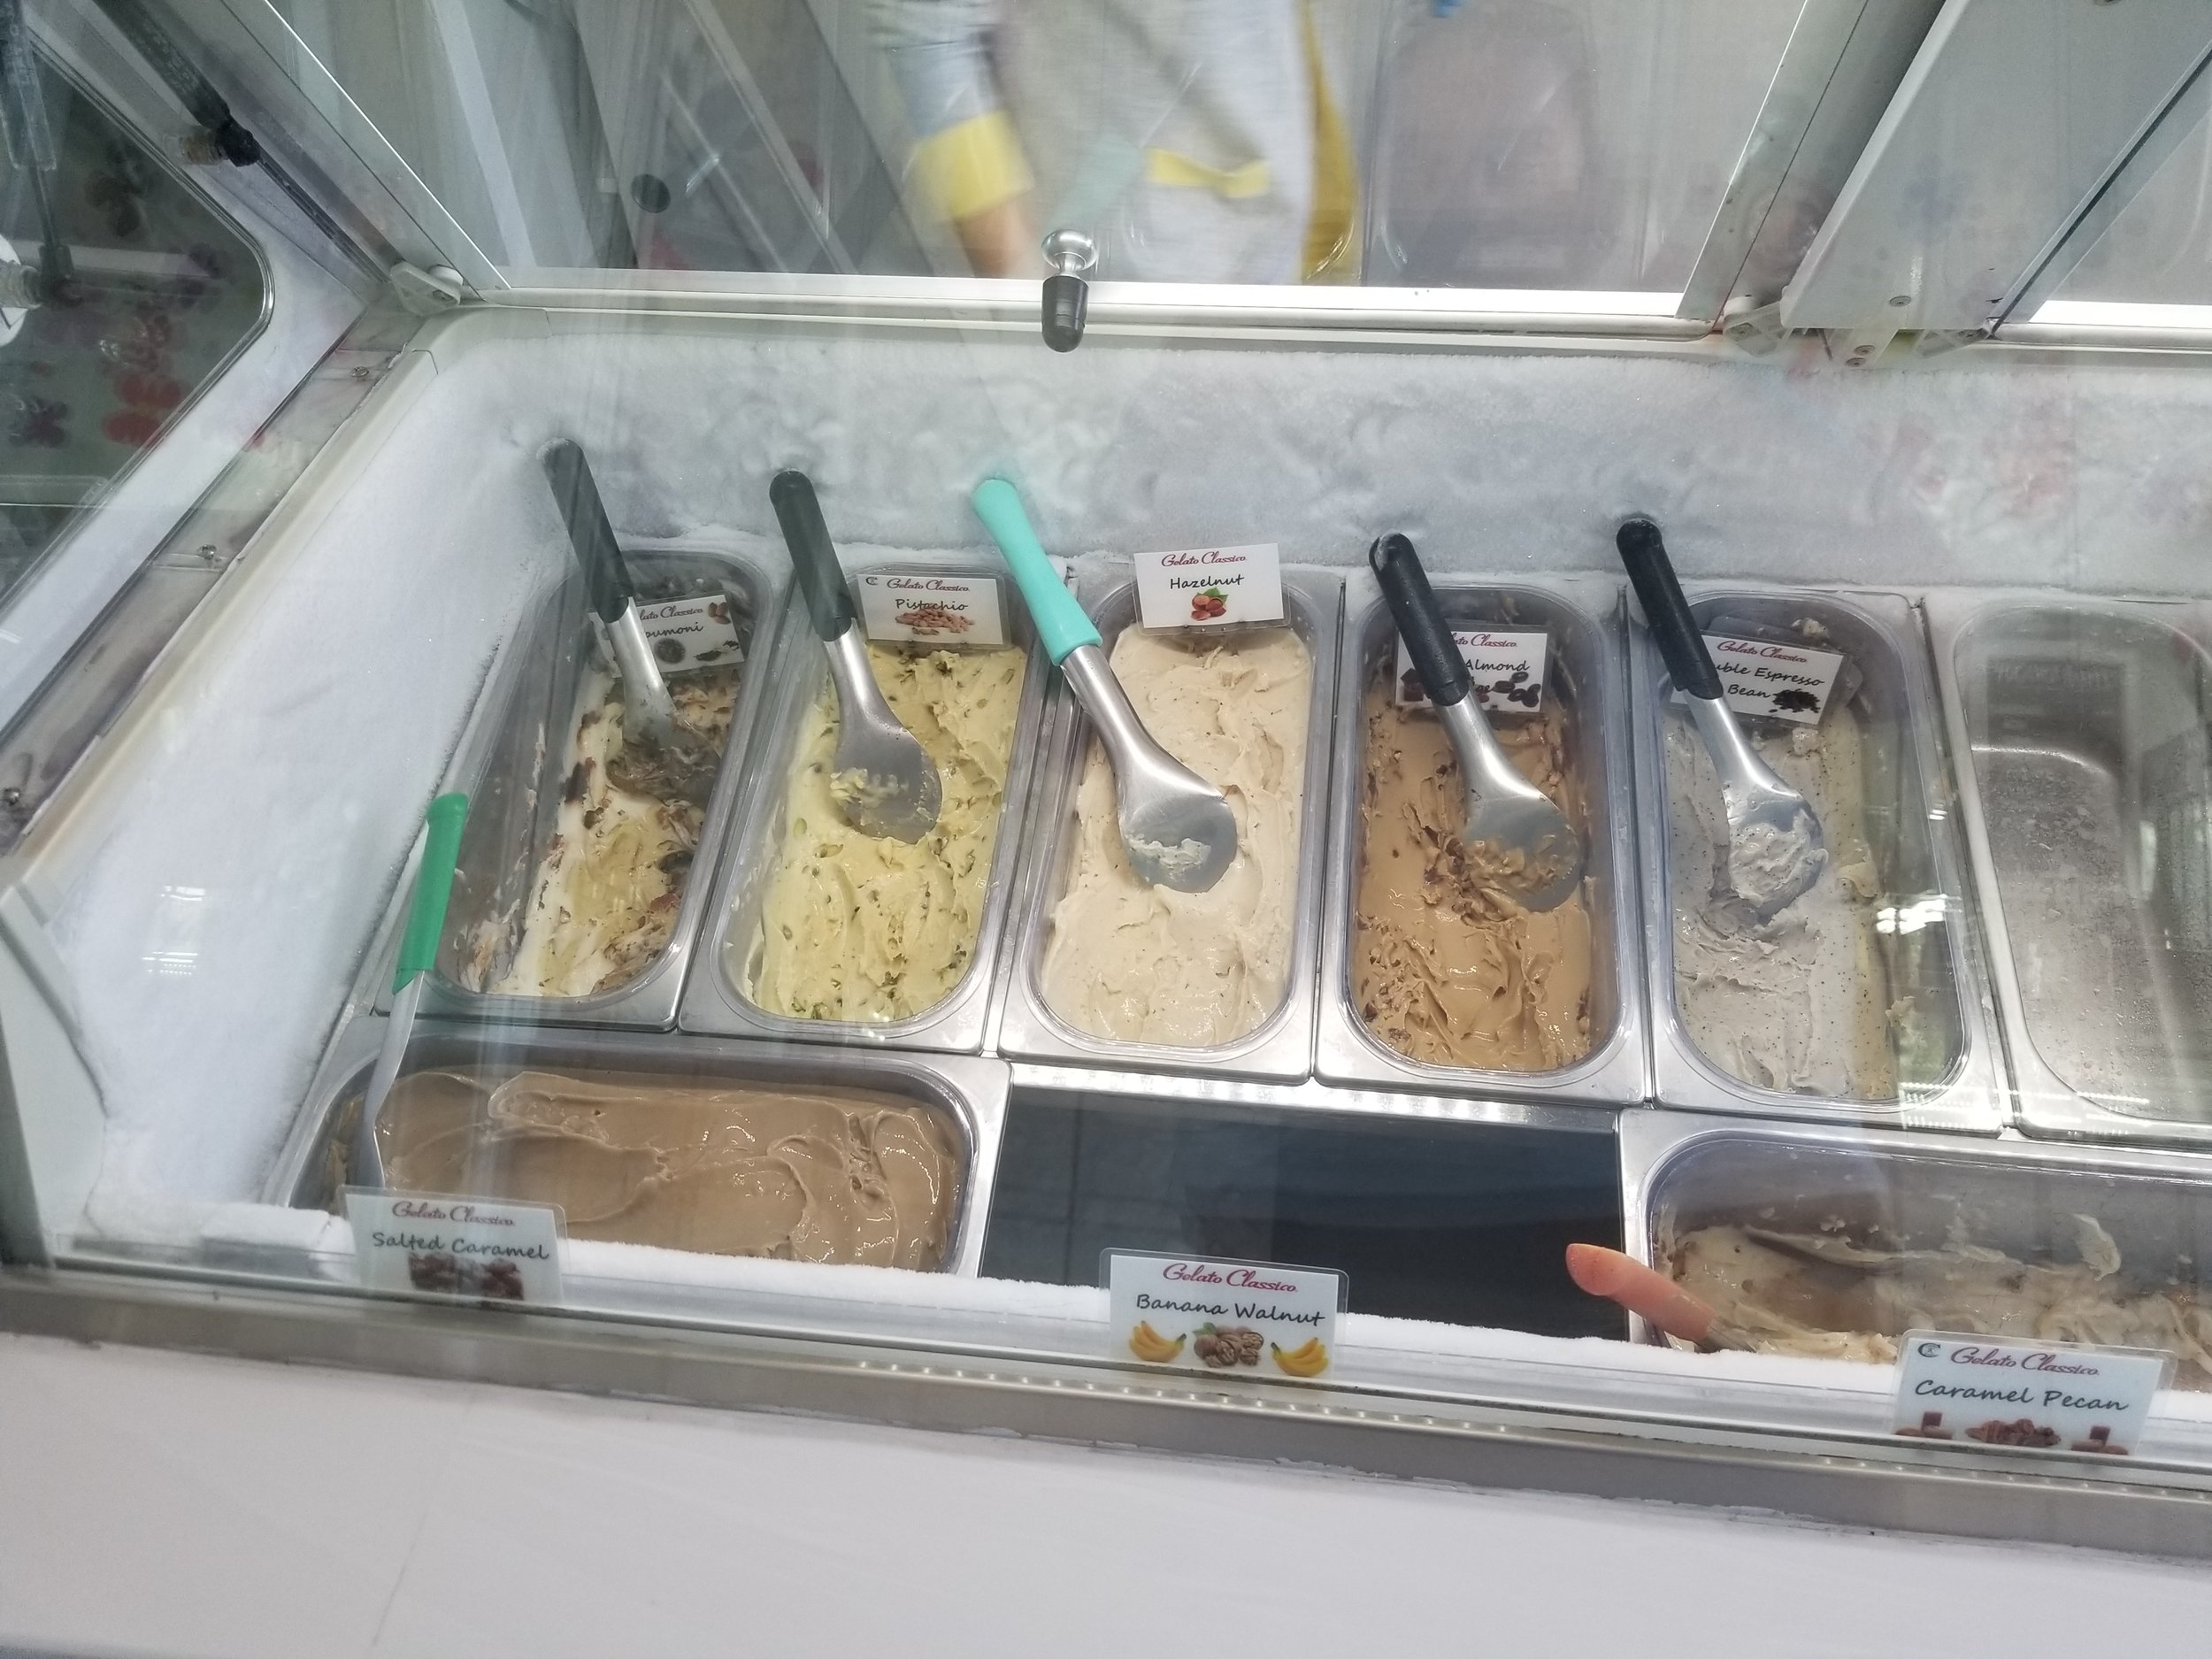 A freezer case filled with scoopable gelato in multiple flavors.